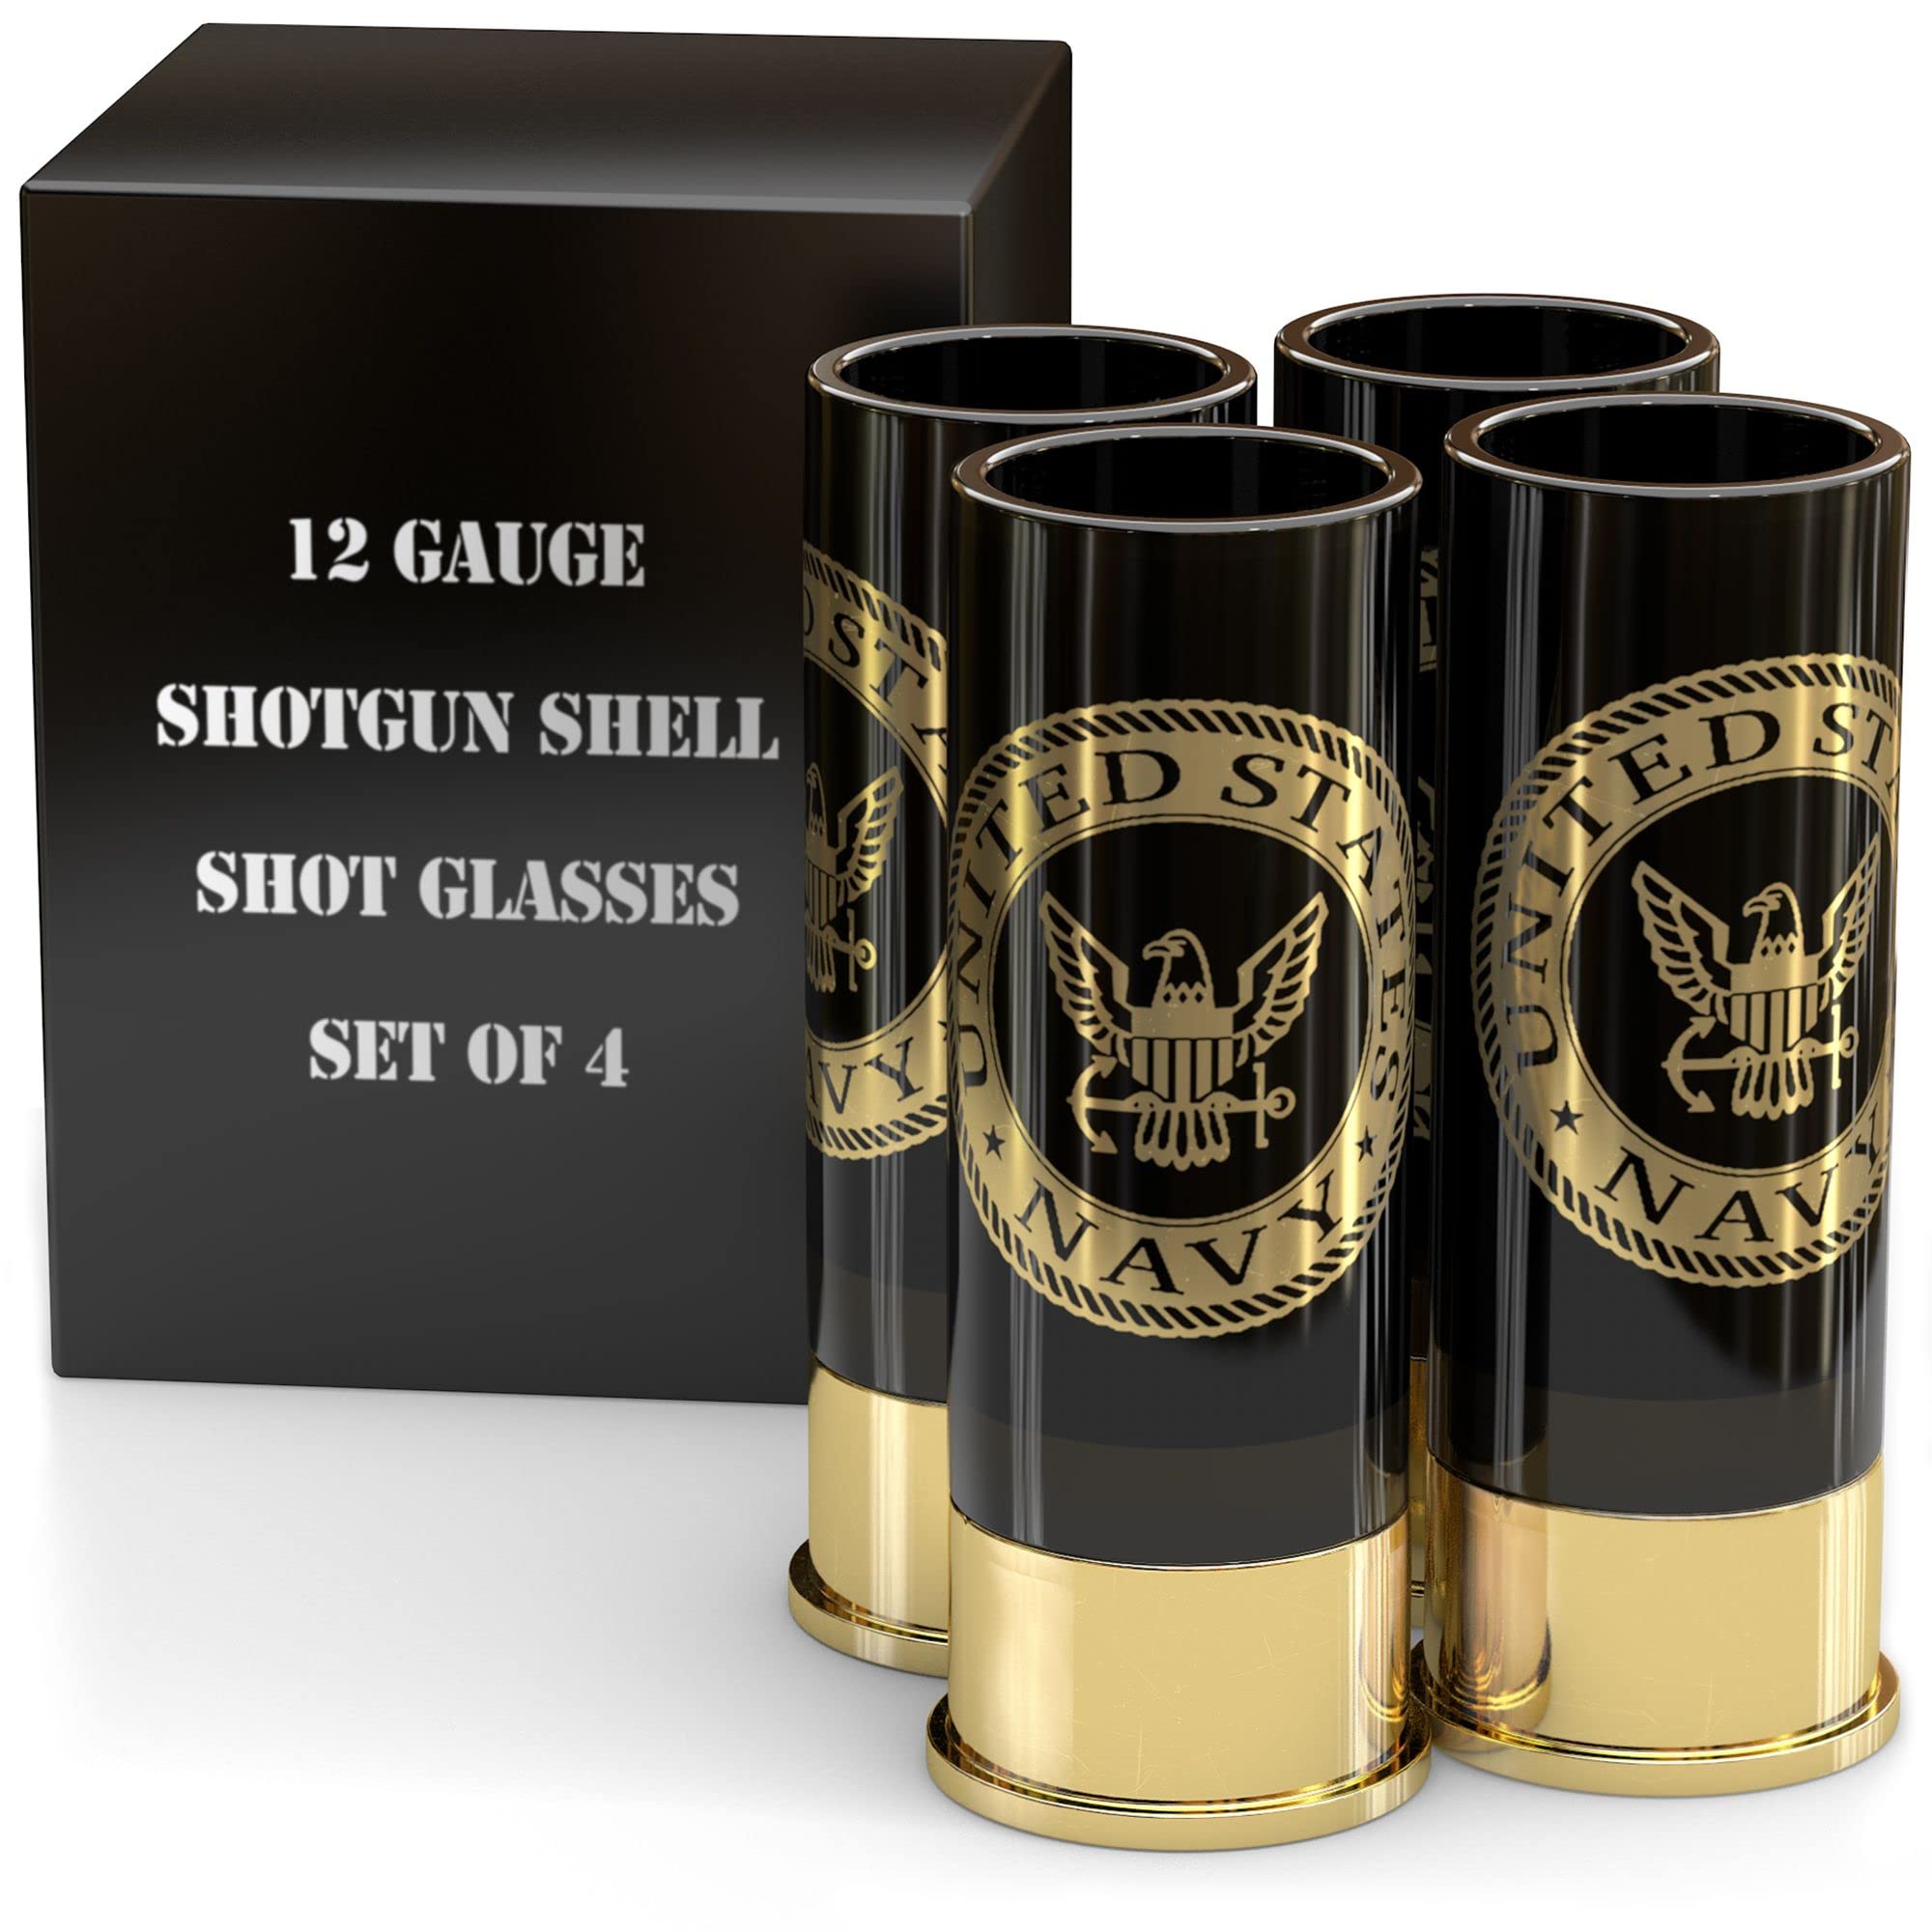 Old Southern Brass U.S. Navy Shot Glasses - Set of 4 - Officially Licensed